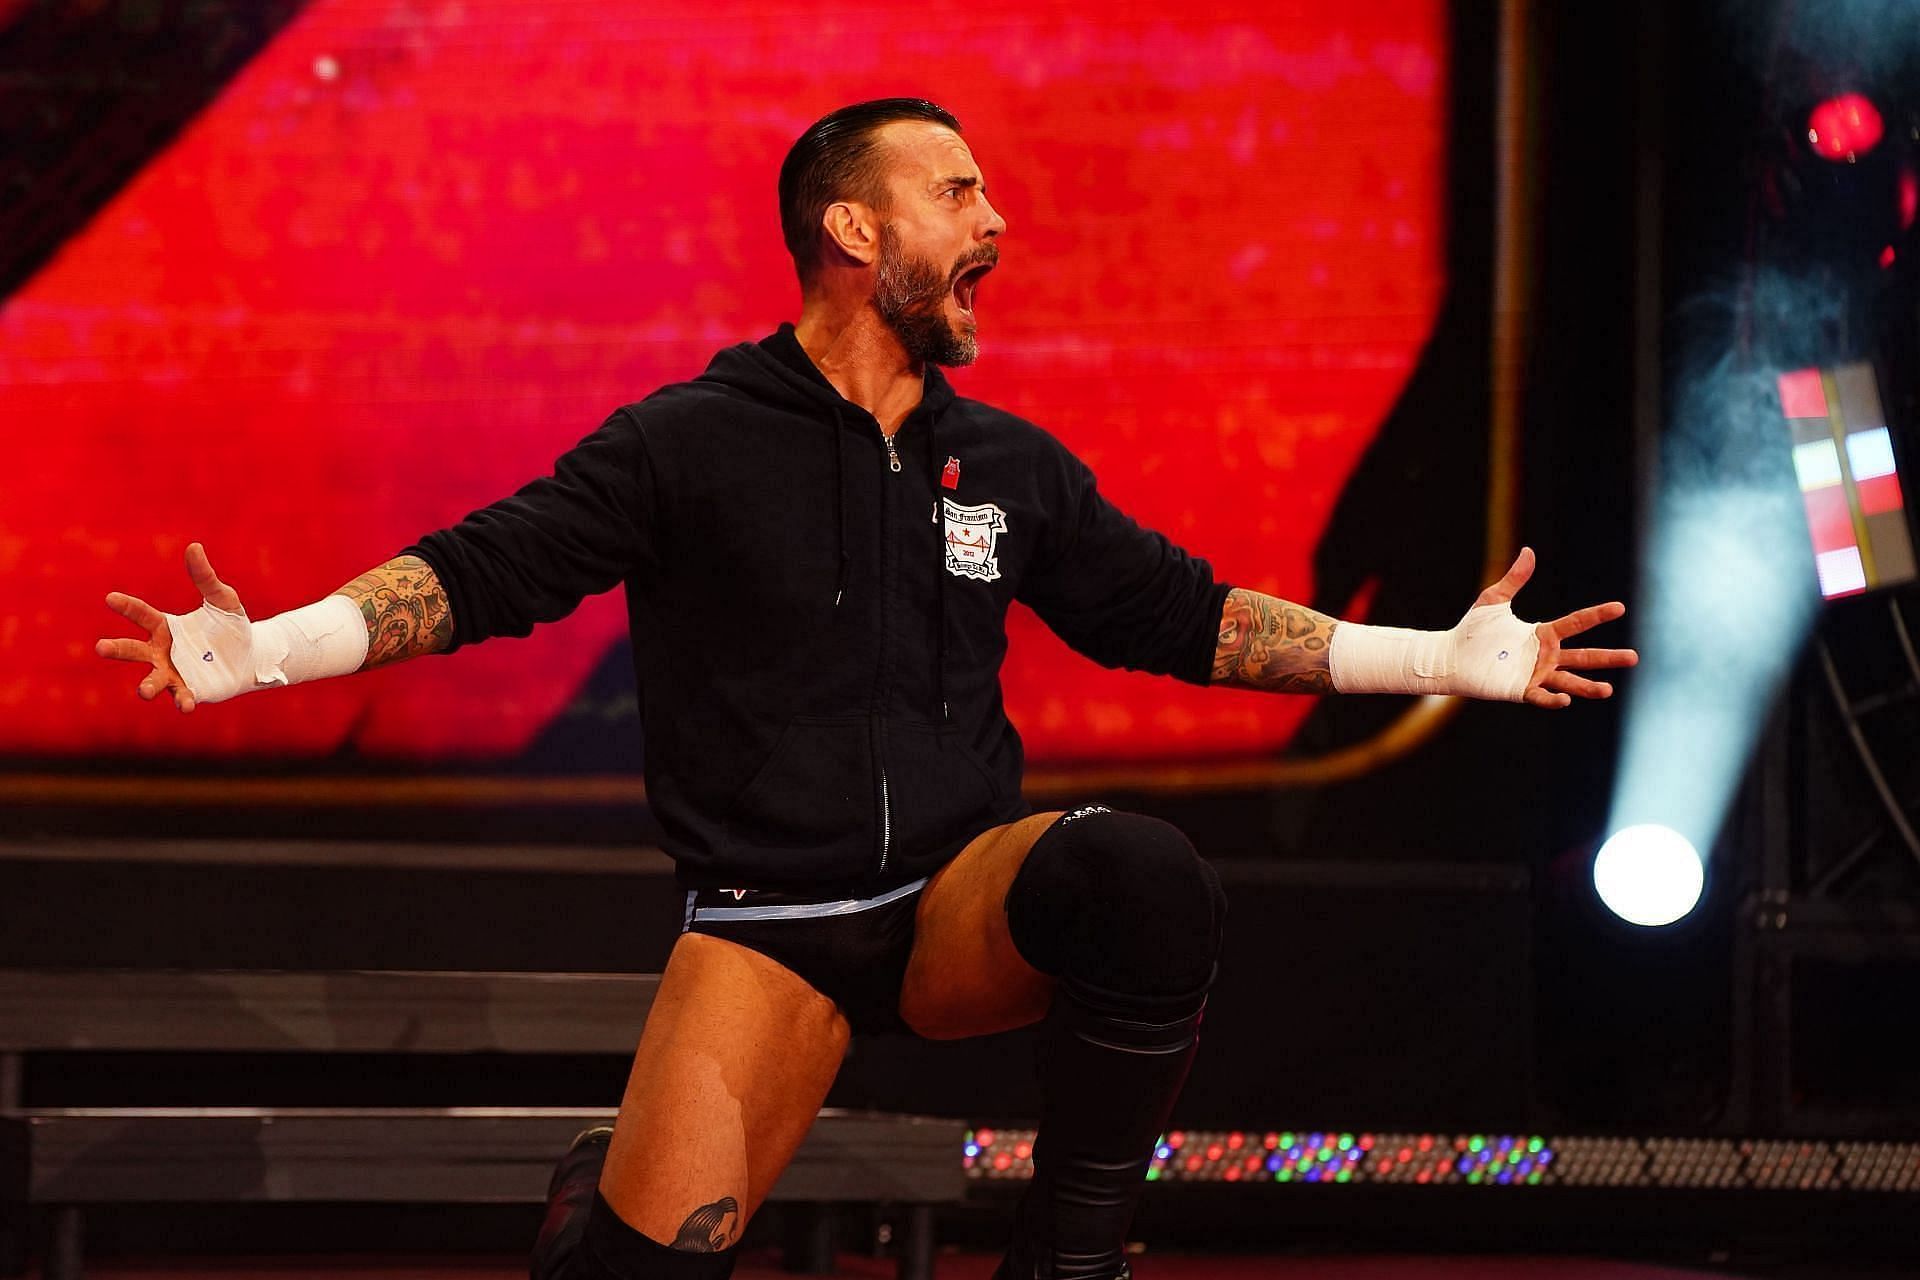 The former WWE star joined AEW in August 2021.